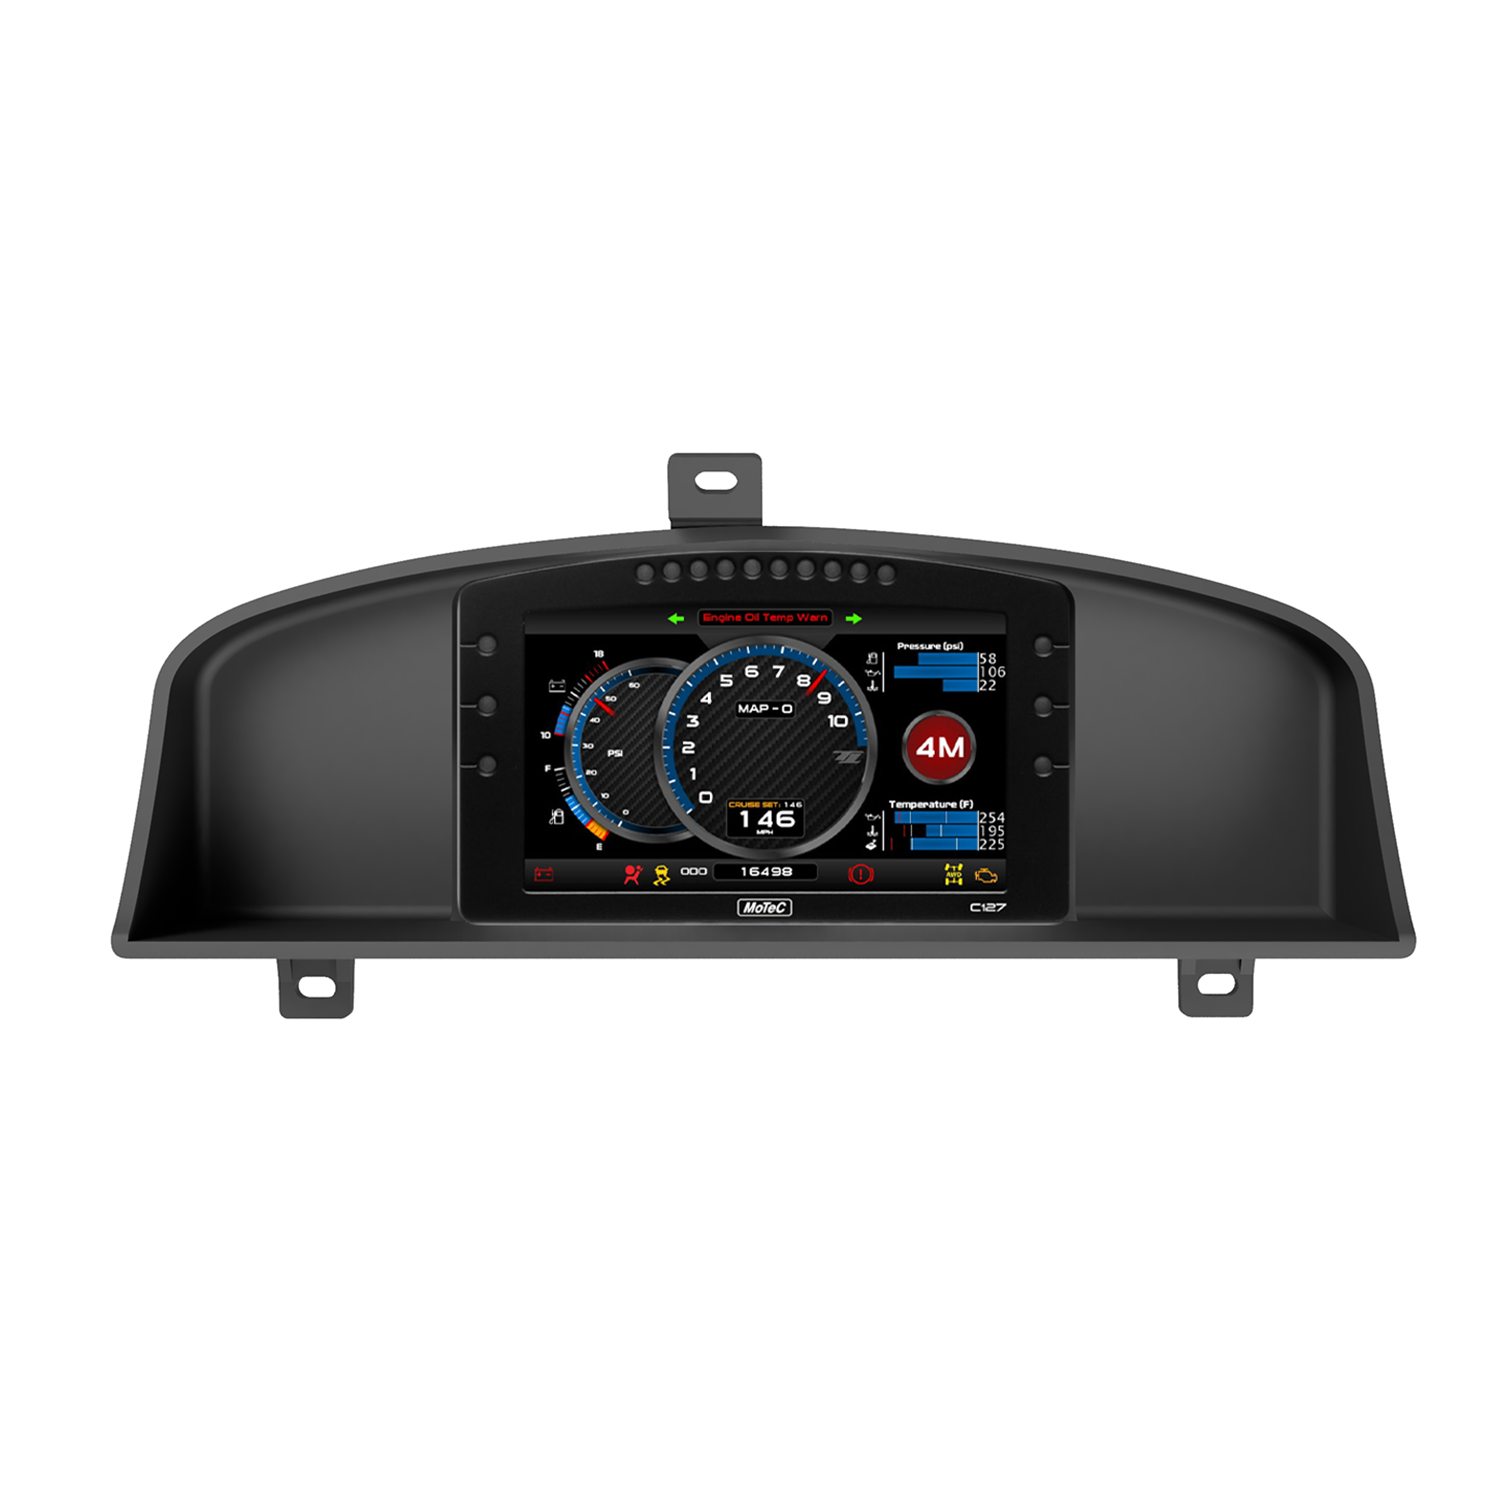 Nissan Skyline R33 Recessed Dash Mount for the Motec C127 Display (display not included)